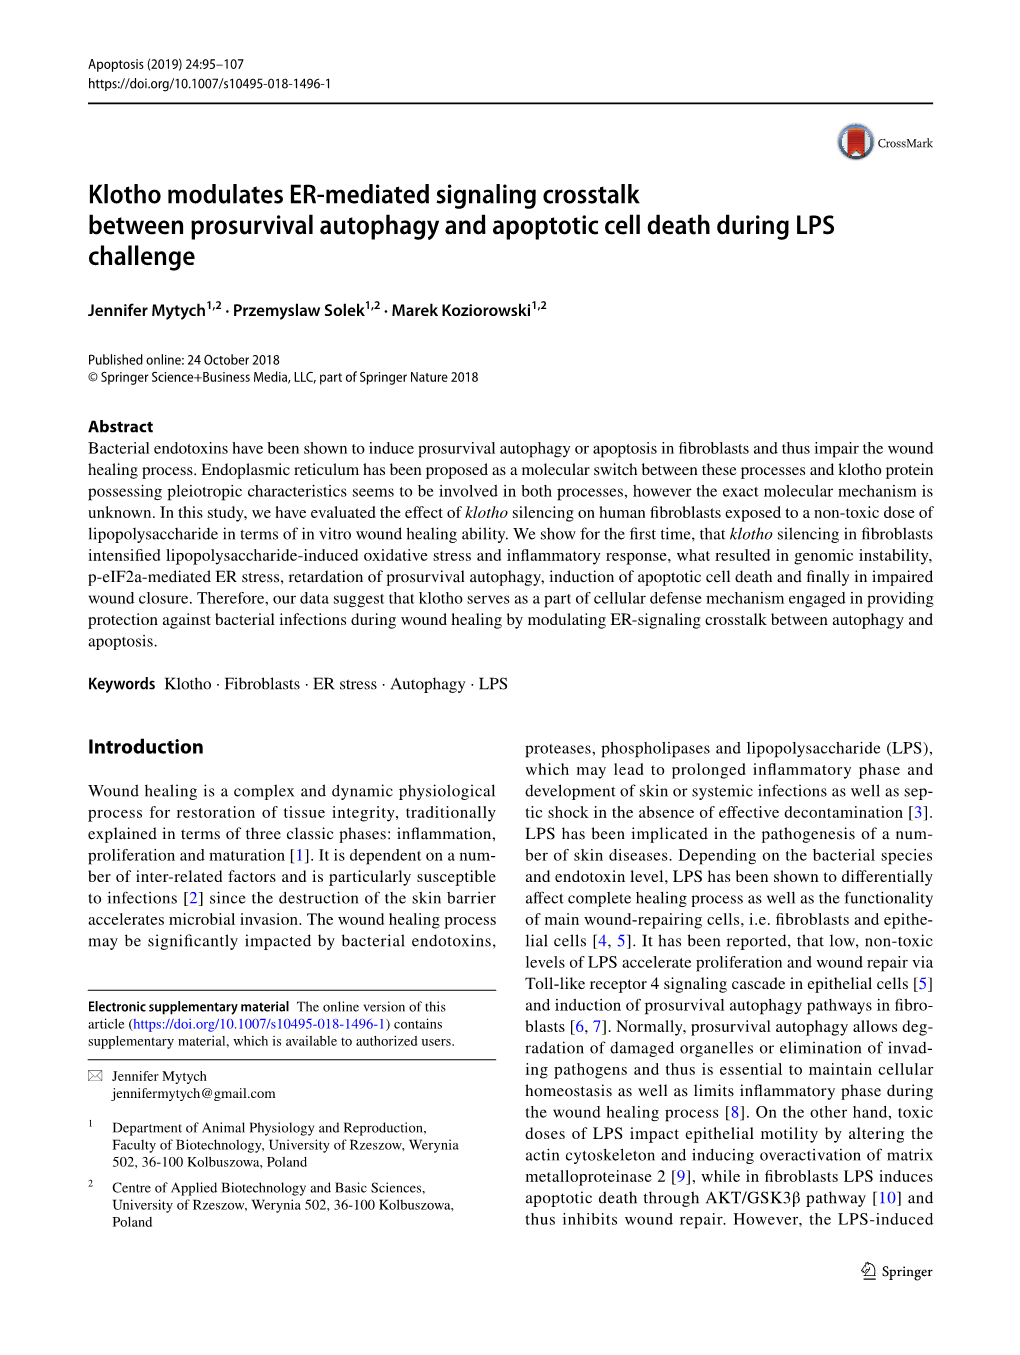 Klotho Modulates ER-Mediated Signaling Crosstalk Between Prosurvival Autophagy and Apoptotic Cell Death During LPS Challenge